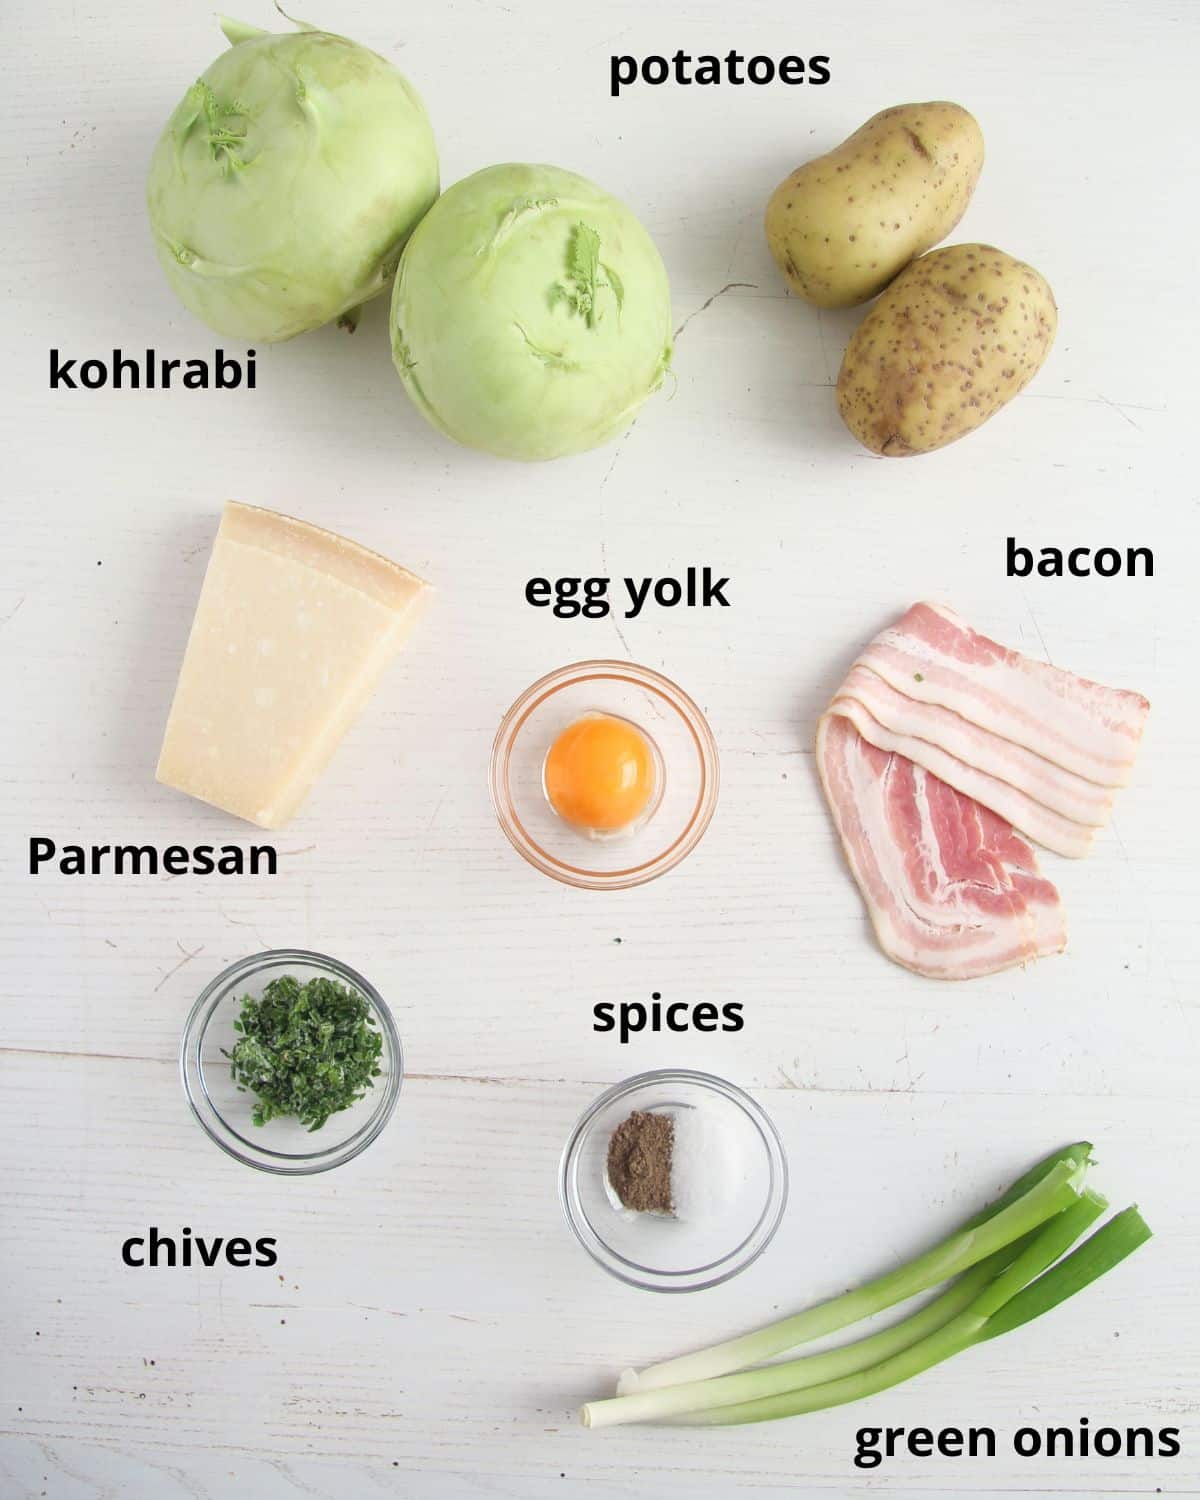 listed ingredients for stuffing kohlrabi with bacon and potatoes. 